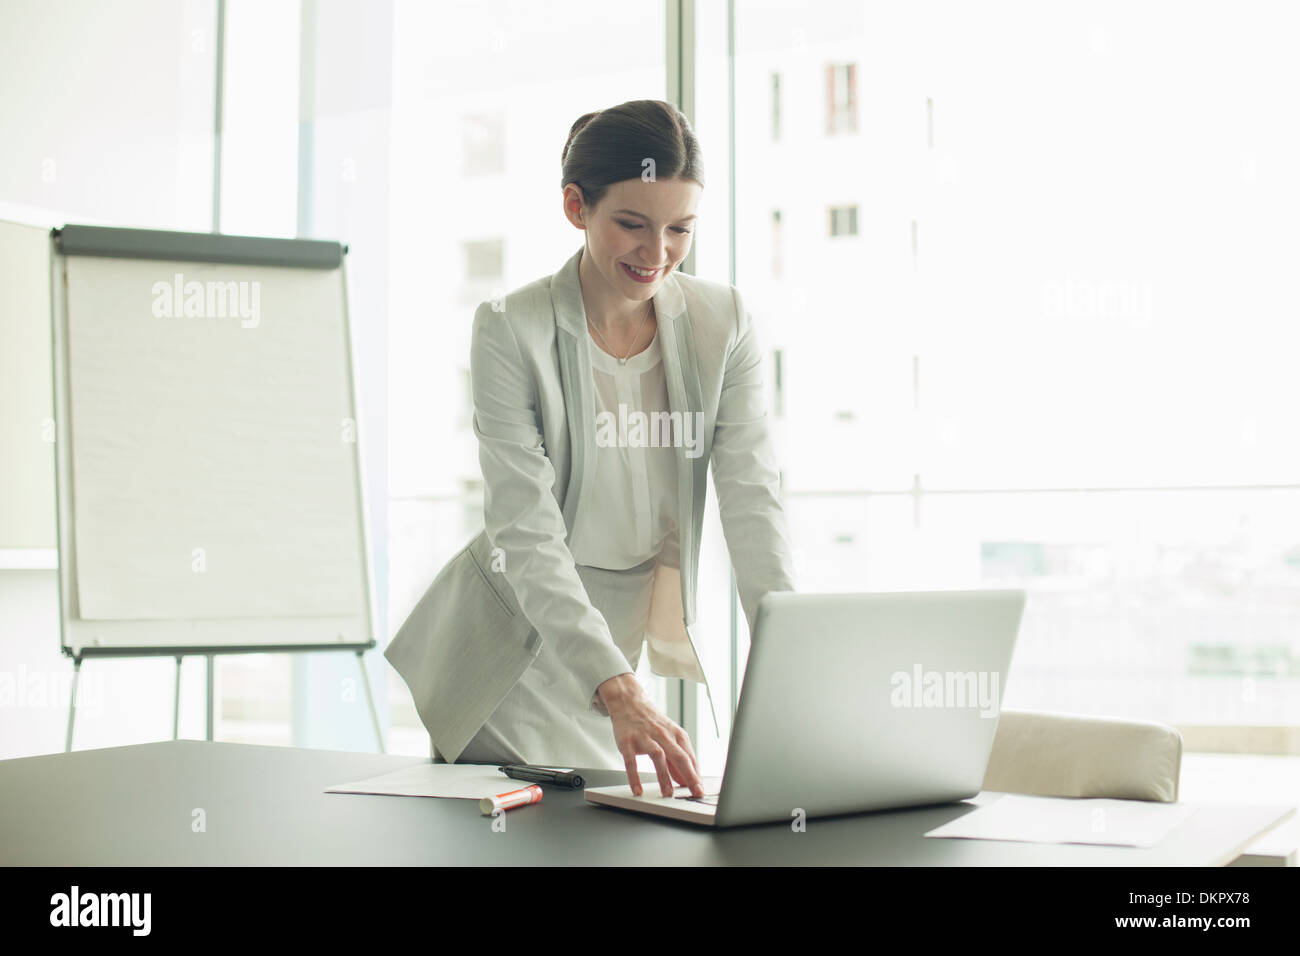 Businesswoman using laptop in office Banque D'Images